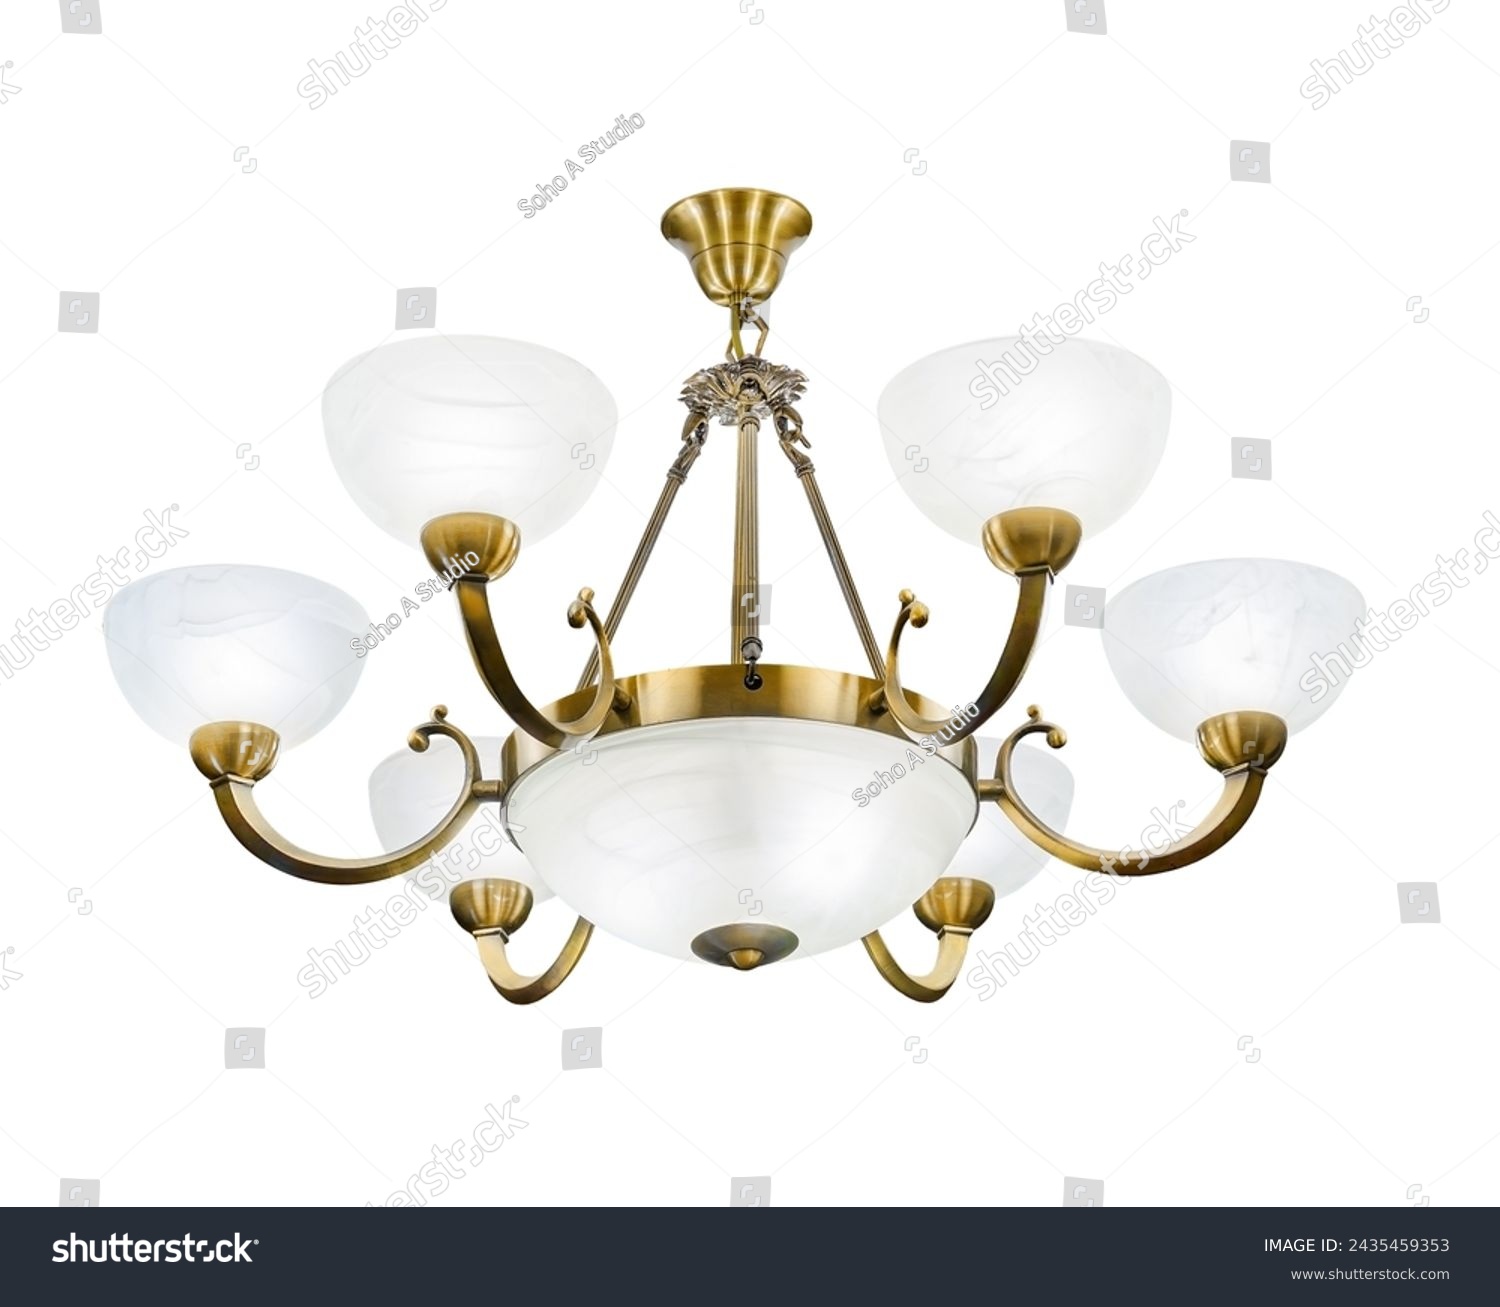 Suspended ceiling chandelier in classic style with bronze or brass fittings Isolated on white background #2435459353